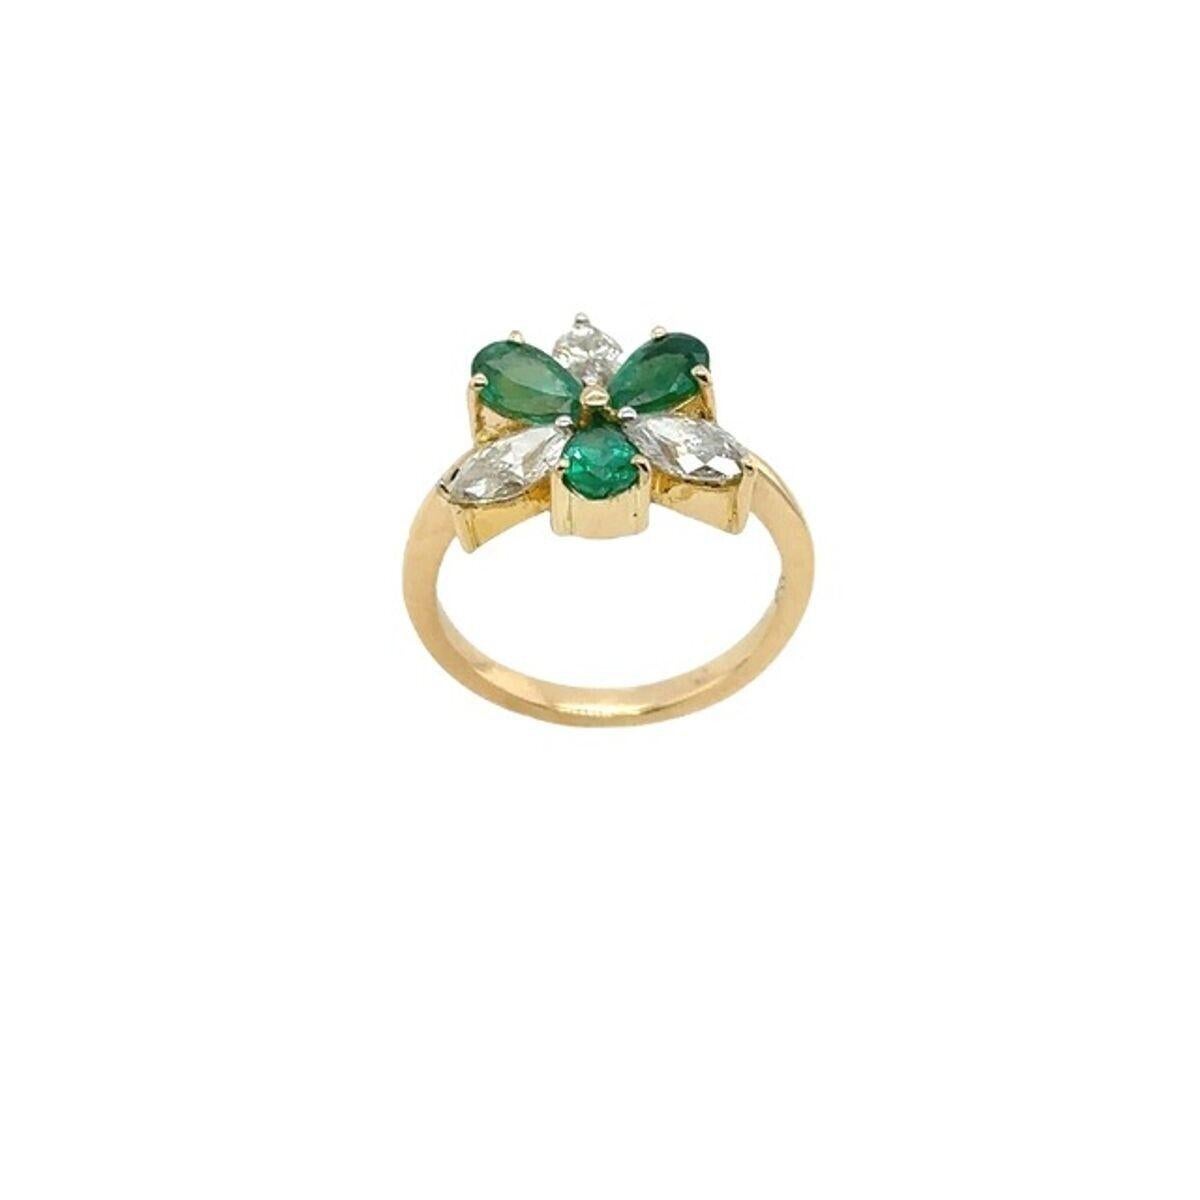 This gorgeous Emerald and Diamond ring is set in 18ct Yellow Gold setting. With 3 natural marquise cut Diamonds, 1.0ct total weight and 3 pear shape Emeralds, 1.0ct total weight. This is a unique and eye-catching ring.

Additional Information:
Total